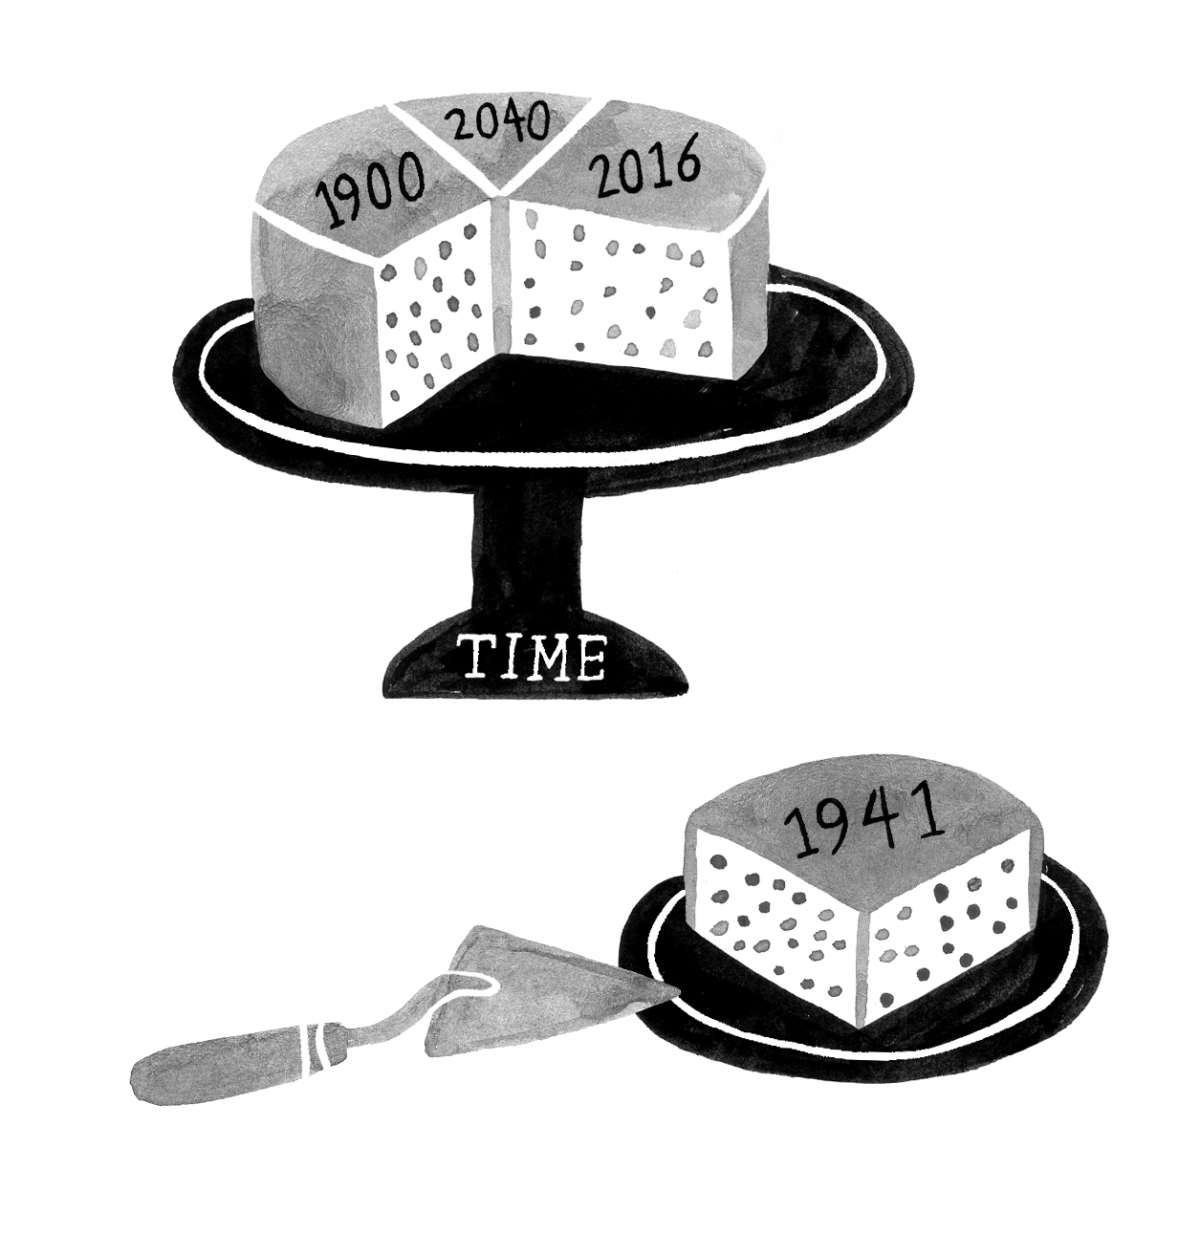 A cake stand that reads "time" holds up a cake sliced into 4 labelled with different years. One slice of cake is missing, and is instead on a plate/